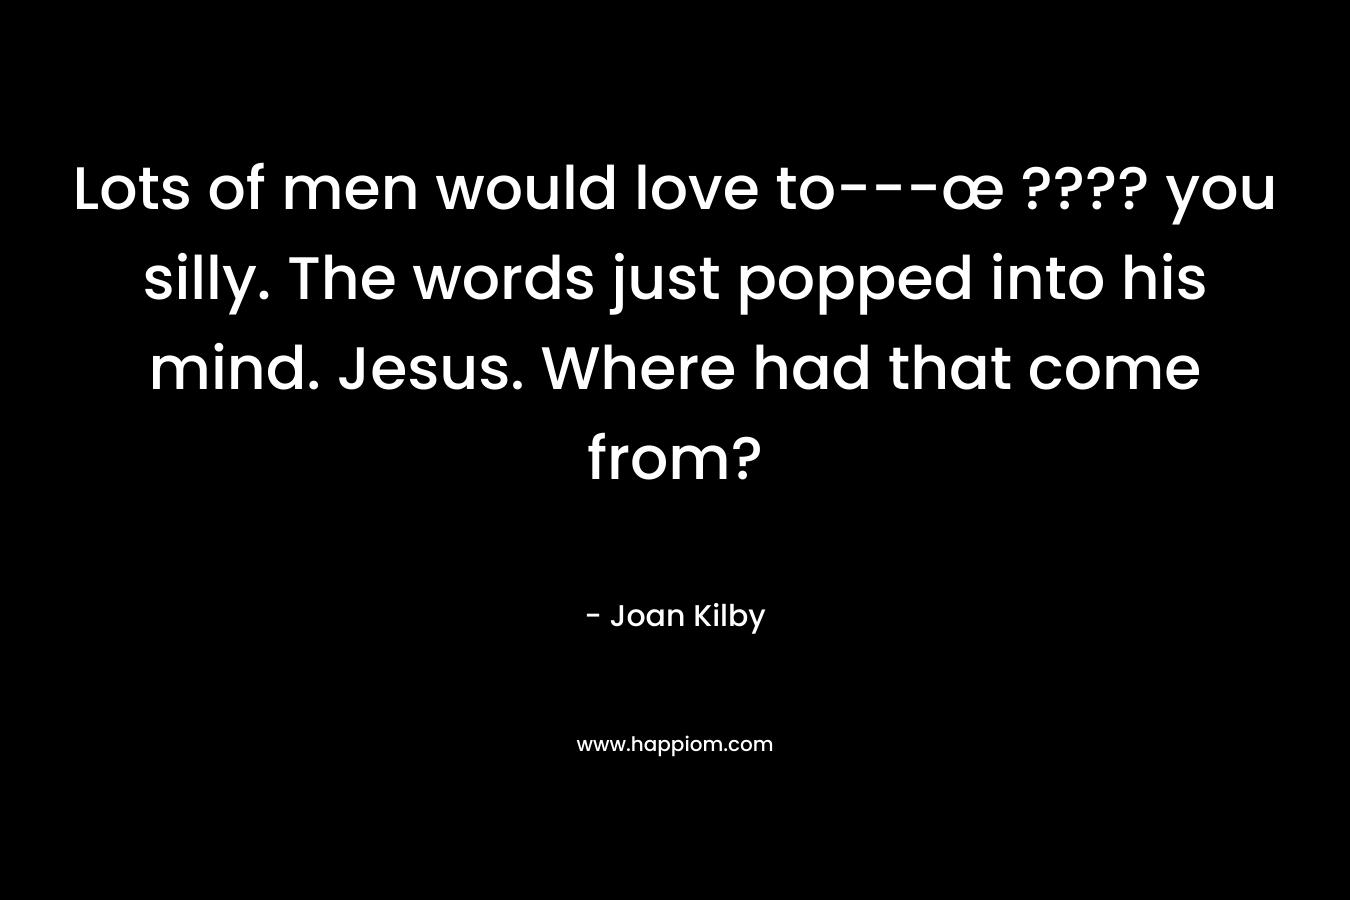 Lots of men would love to---œ ???? you silly. The words just popped into his mind. Jesus. Where had that come from?